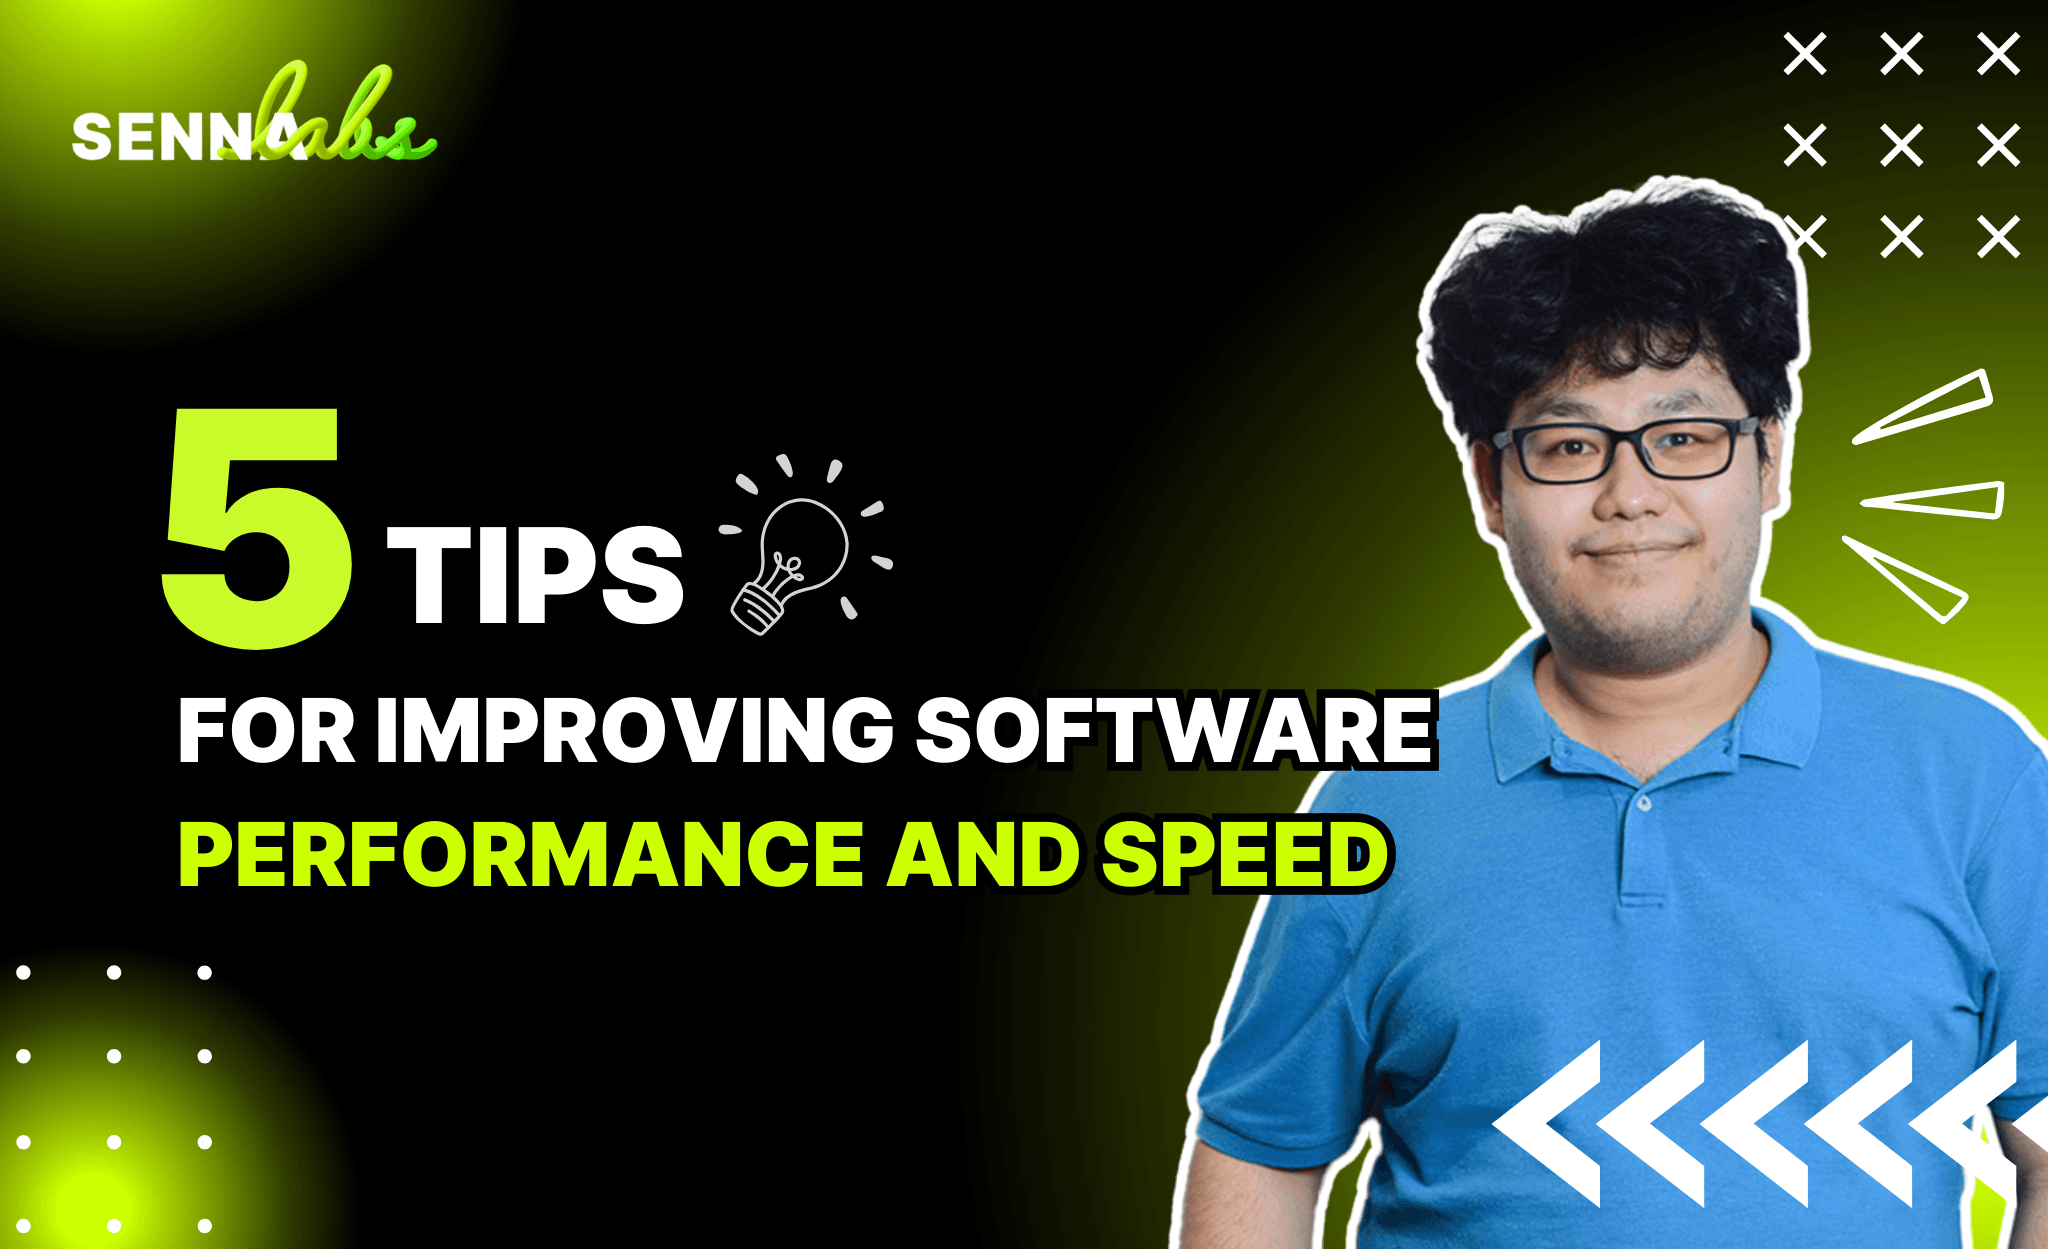 5 Tips for Improving Software Performance and Speed